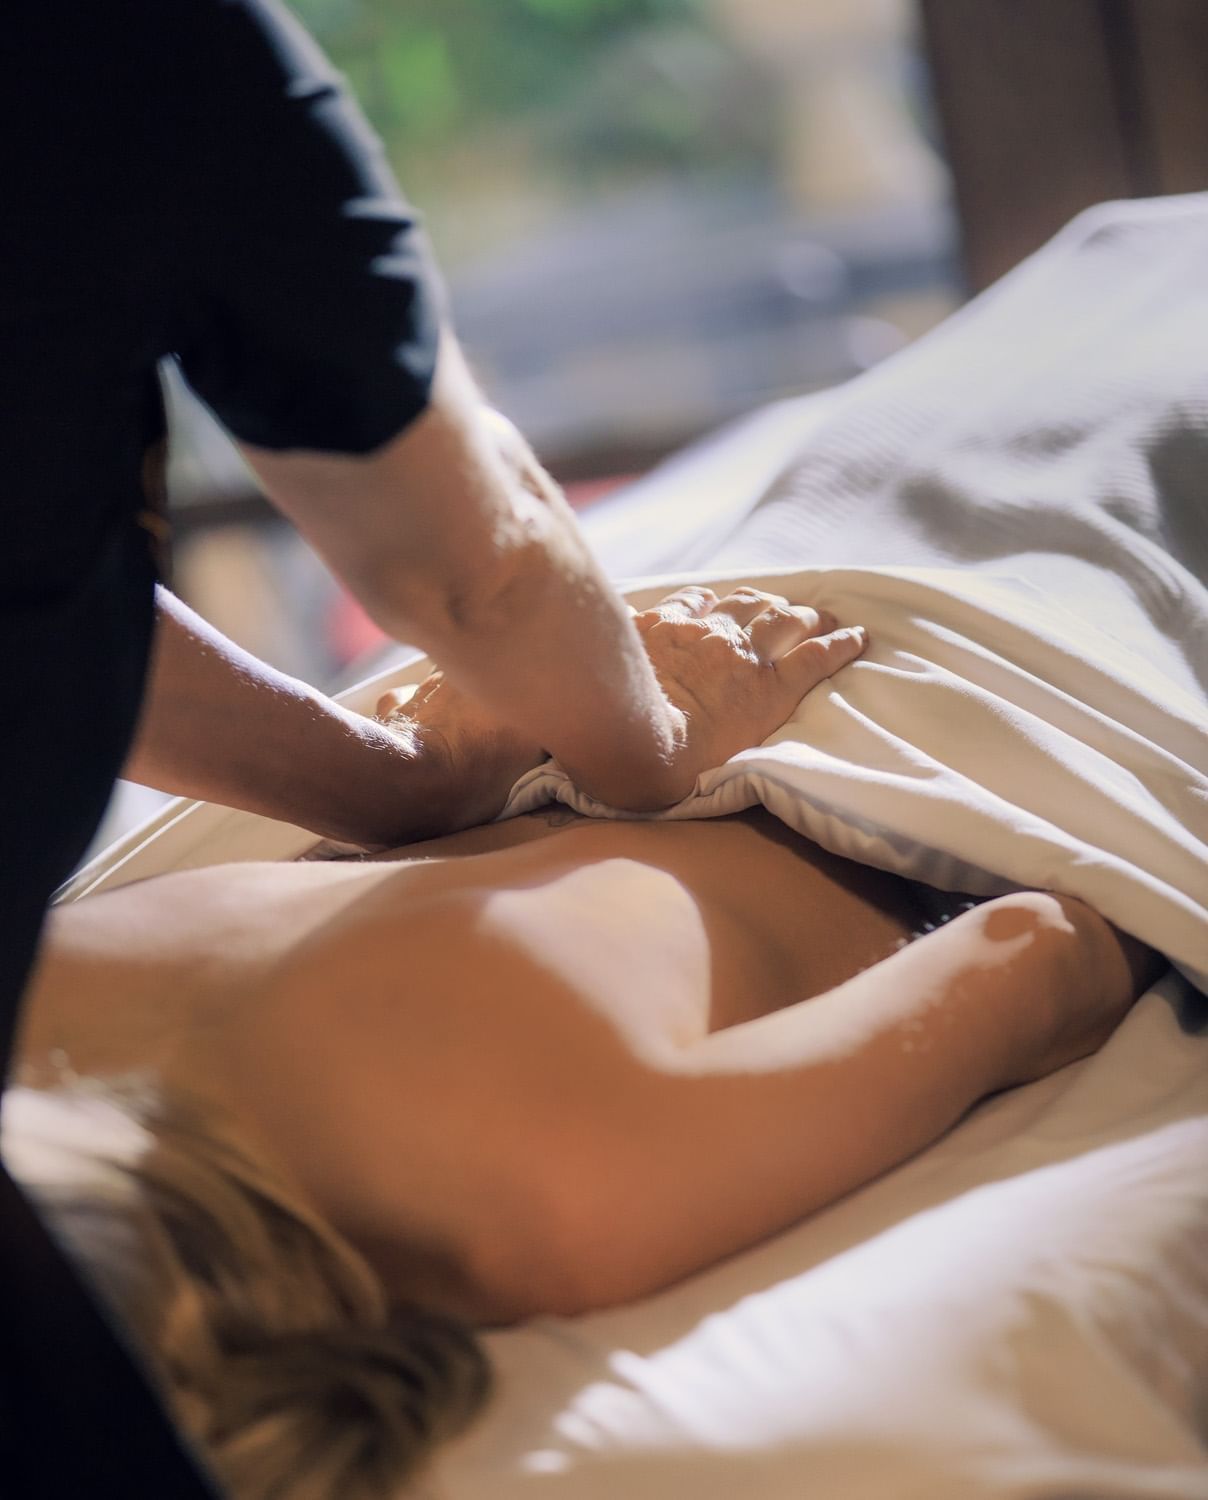 Woman laying face down on massage table while being massaged.